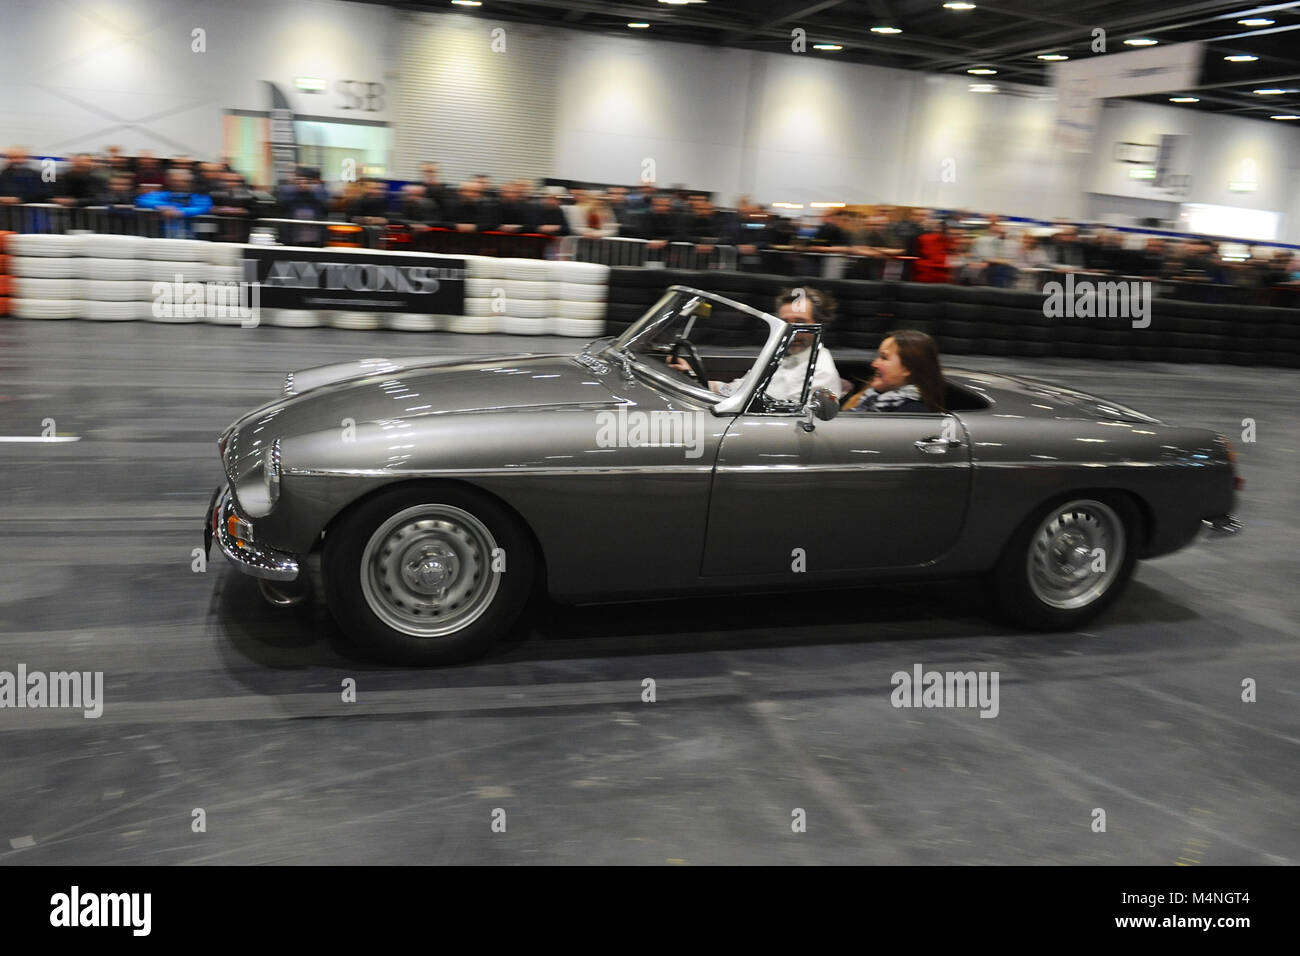 London, UK. 17th Feb, 2018. A MGB Abingdon Edition being driven in the daily promenade on the Grand Parade at the London Classic Car Show which is taking place at ExCel London, United Kingdom.  More than 700 of the world's finest classic cars are on display at the show ranging from vintage pre-war tourers to a modern concept cars. The show brings in around 37,000 visitors, ranging from serious petrol heads to people who just love beautiful and classic vehicles. Credit: Michael Preston/Alamy Live News Stock Photo